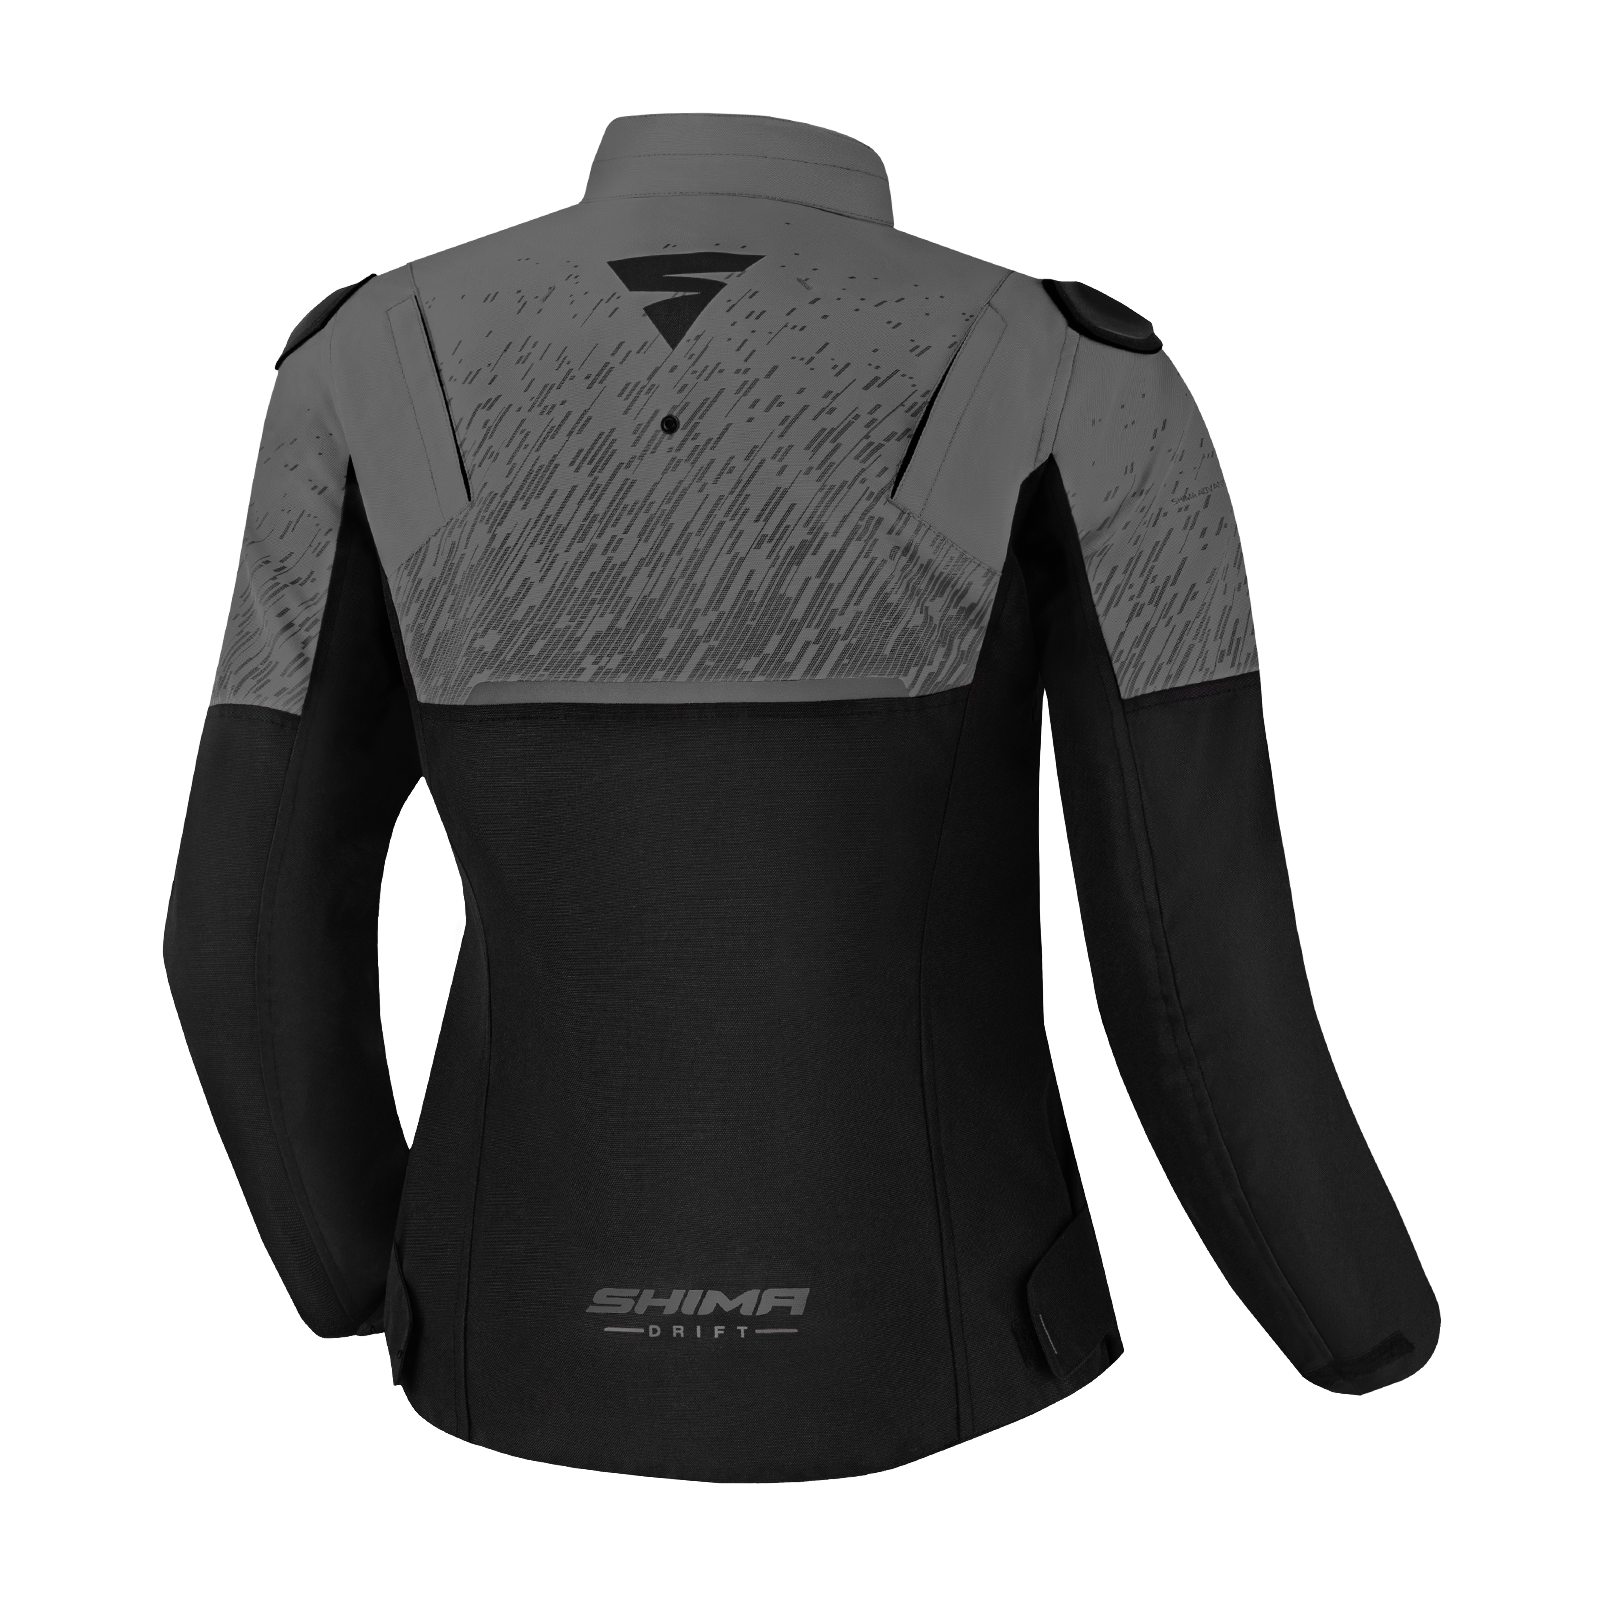 The back of the grey women's motorcycle jacket from SHIMA